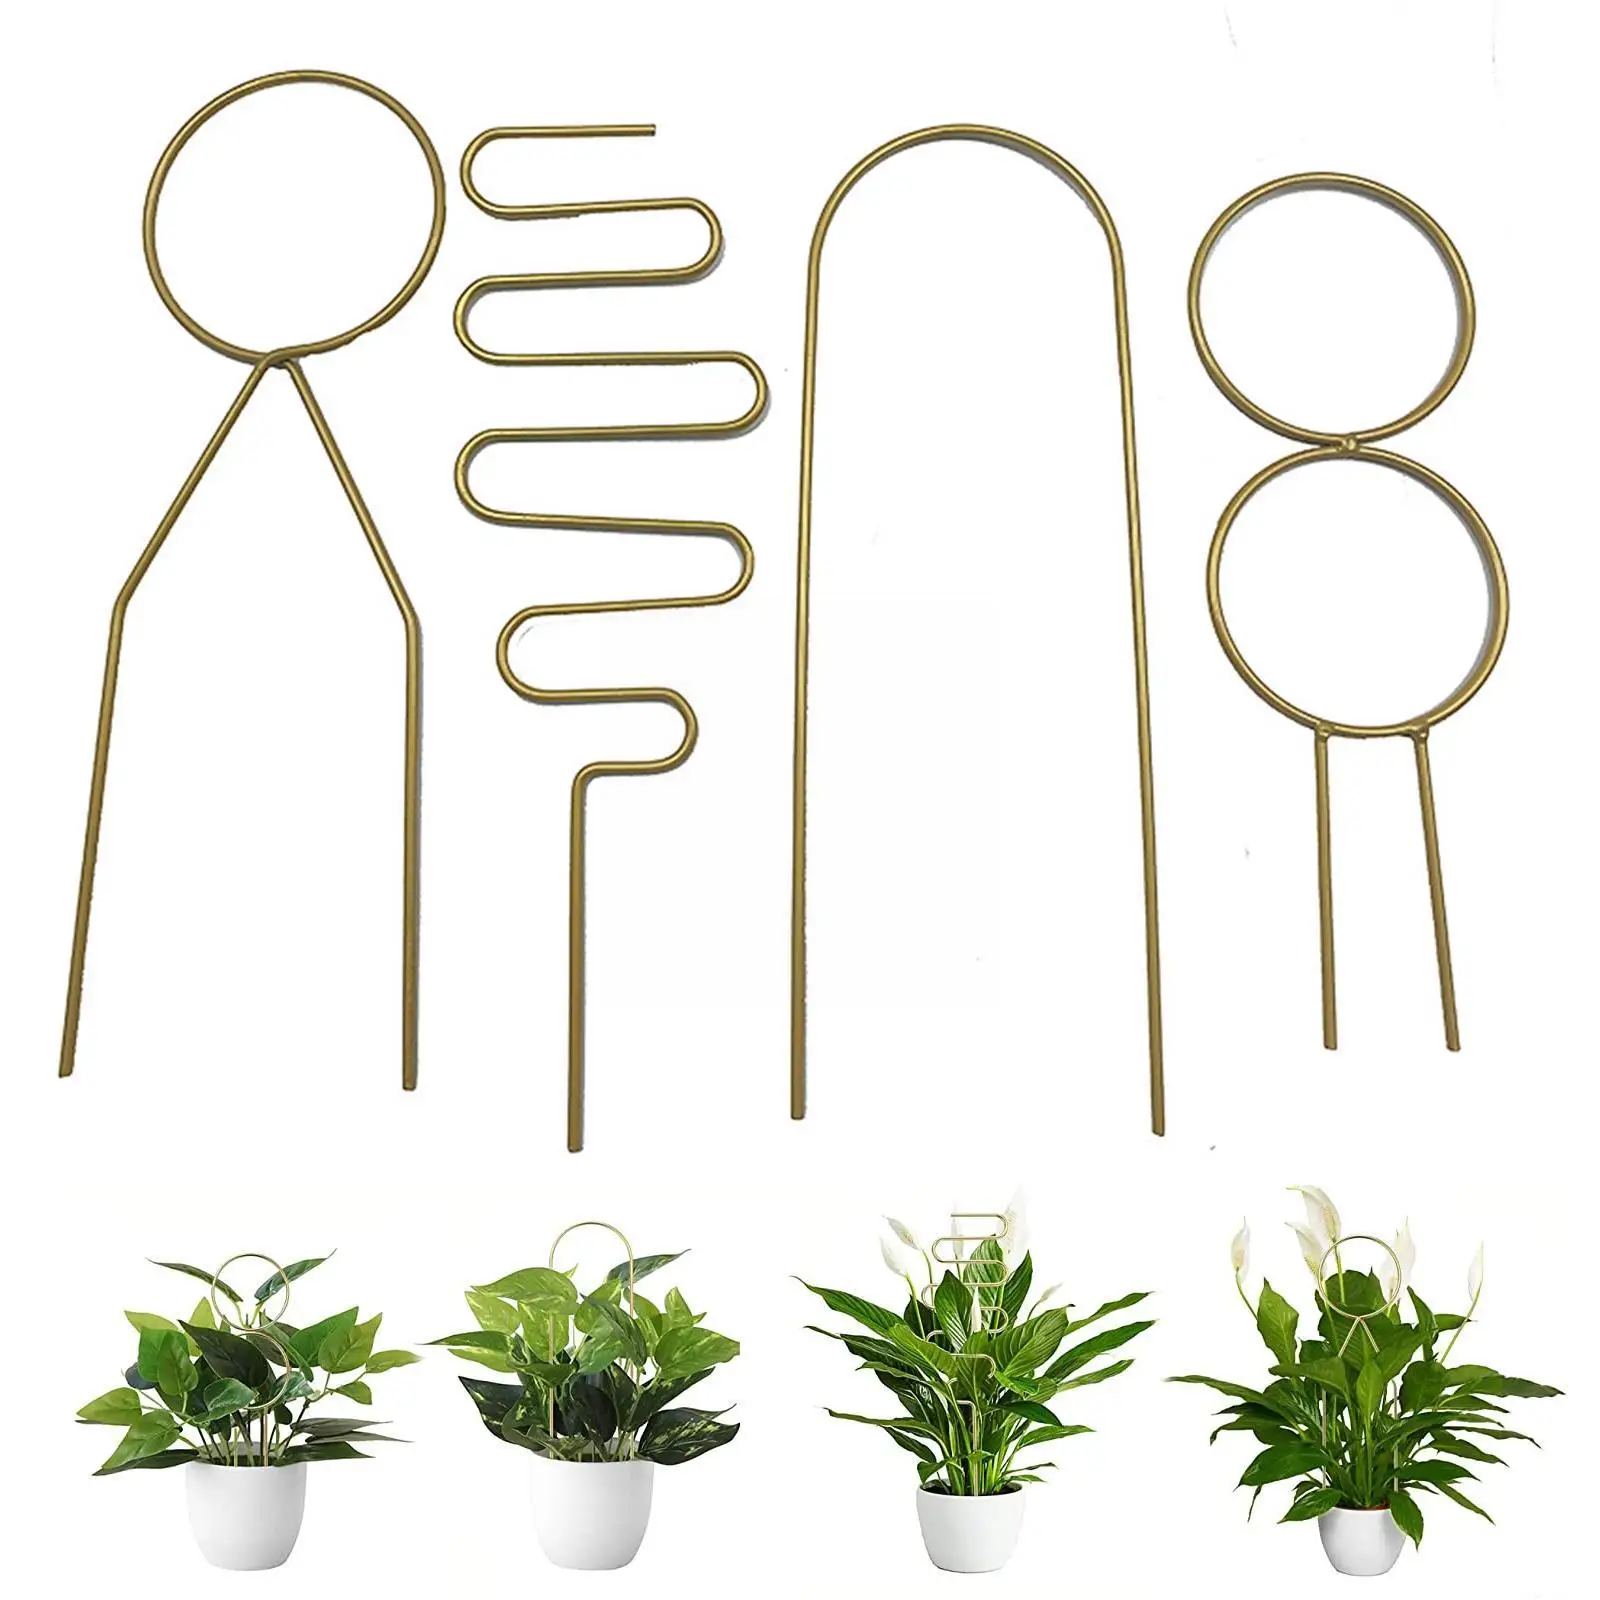 

4Pcs Small Metal Trellis For Potted Plants Plant Trellis For Climbing Plants Indoor. Plant Support Stakes For Small Flowerp U1K2